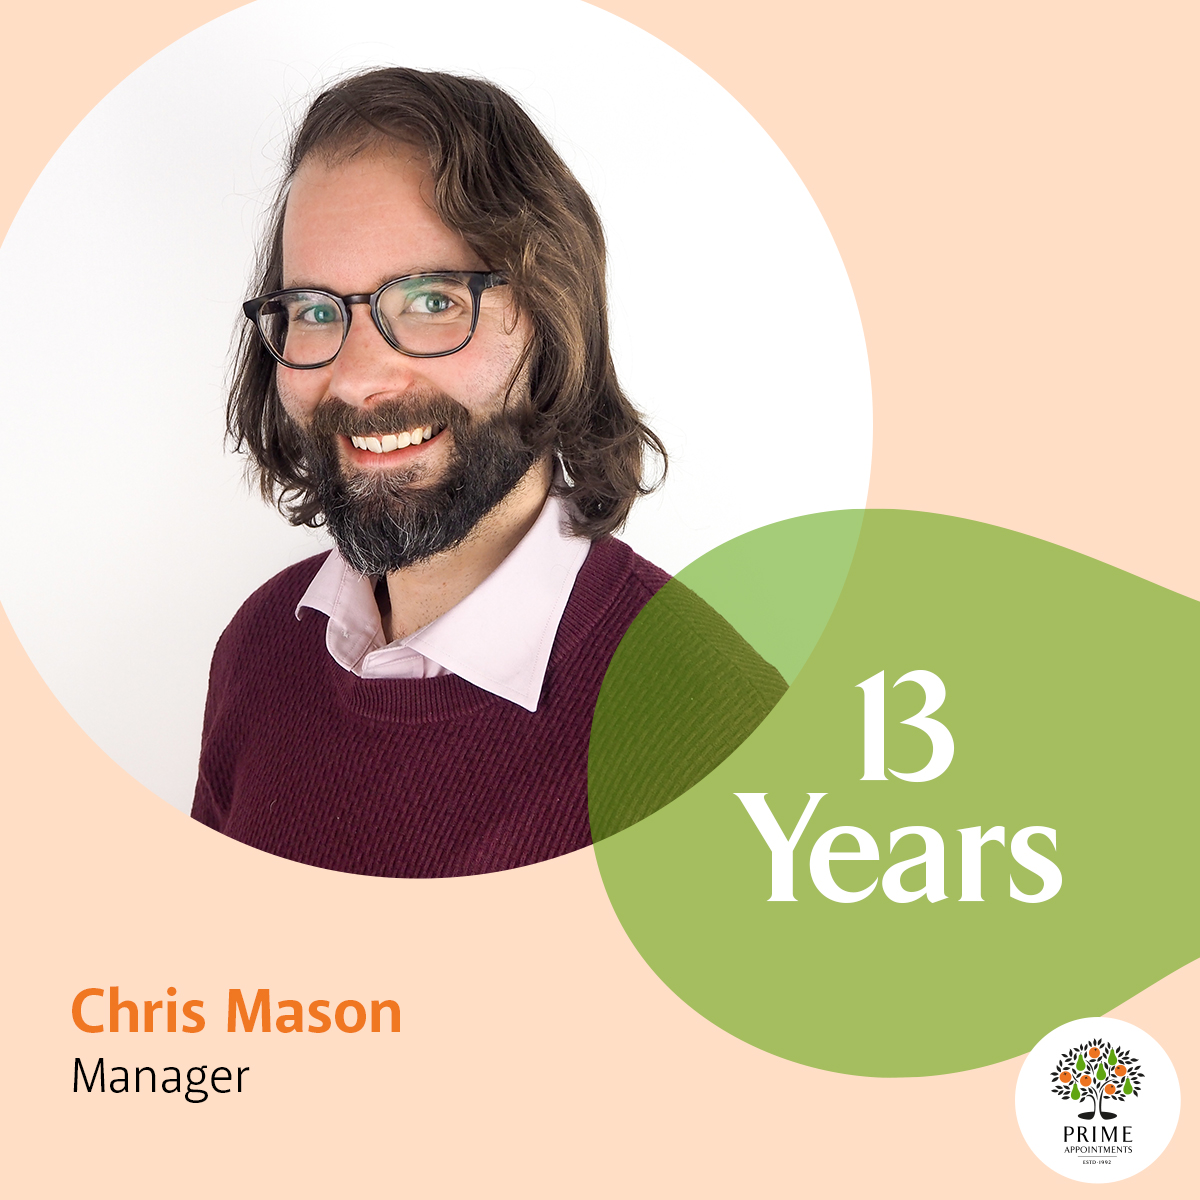 This September, we have two work anniversaries to celebrate! 🎉 We are delighted to celebrate the work anniversary of both Design Executive Storme (5 years) & Industrial Manager Chris (13 years)! Happy anniversary to you both! 🥳 #workiversary #recruitmentagency #recruitment